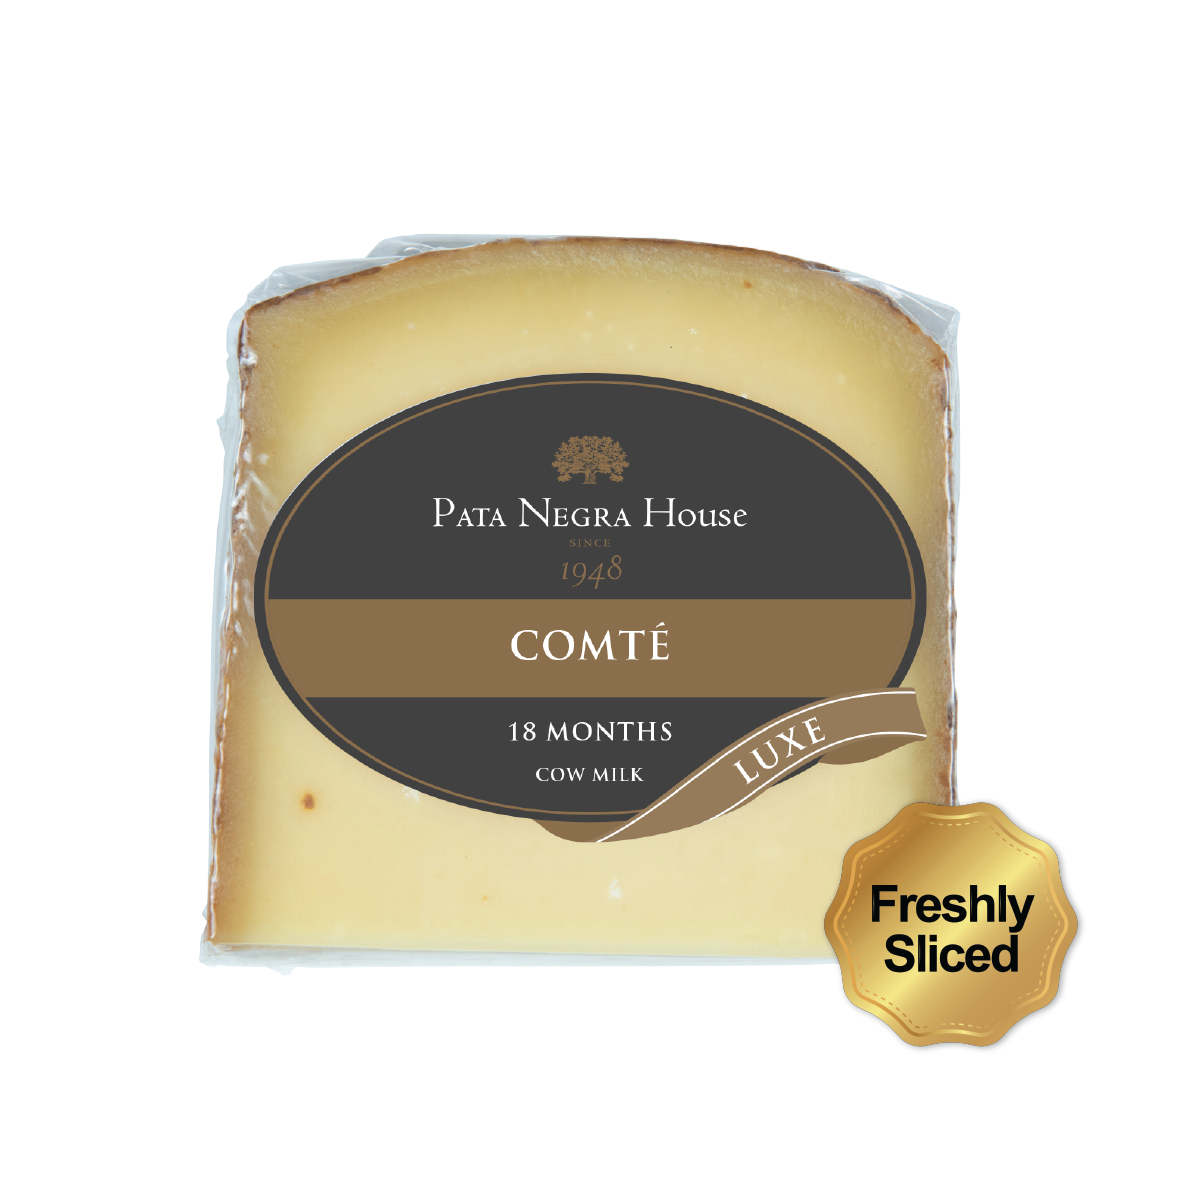 18 Months Comte Cheese